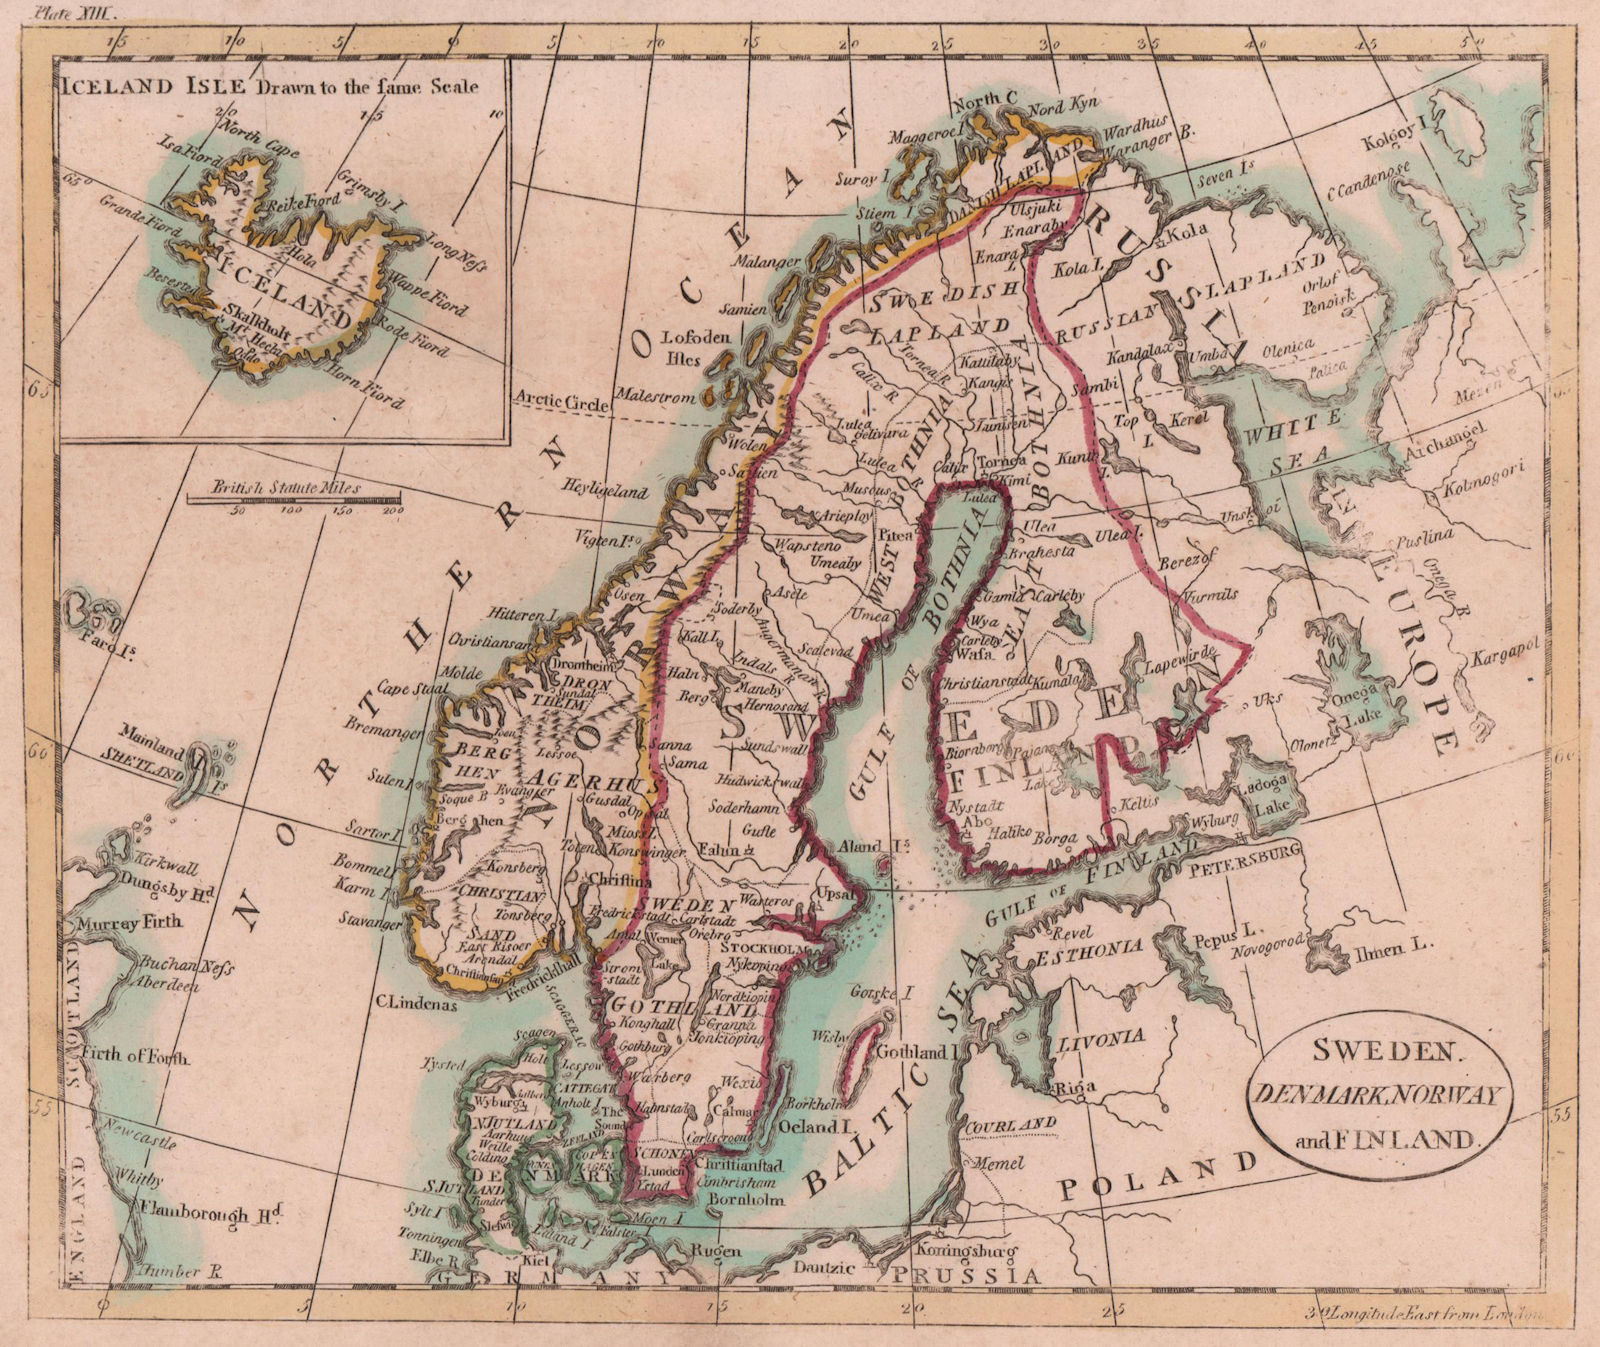 Sweden Denmark Norway and Finland Inset Map of Iceland. Scandinavia. PAYNE 1798